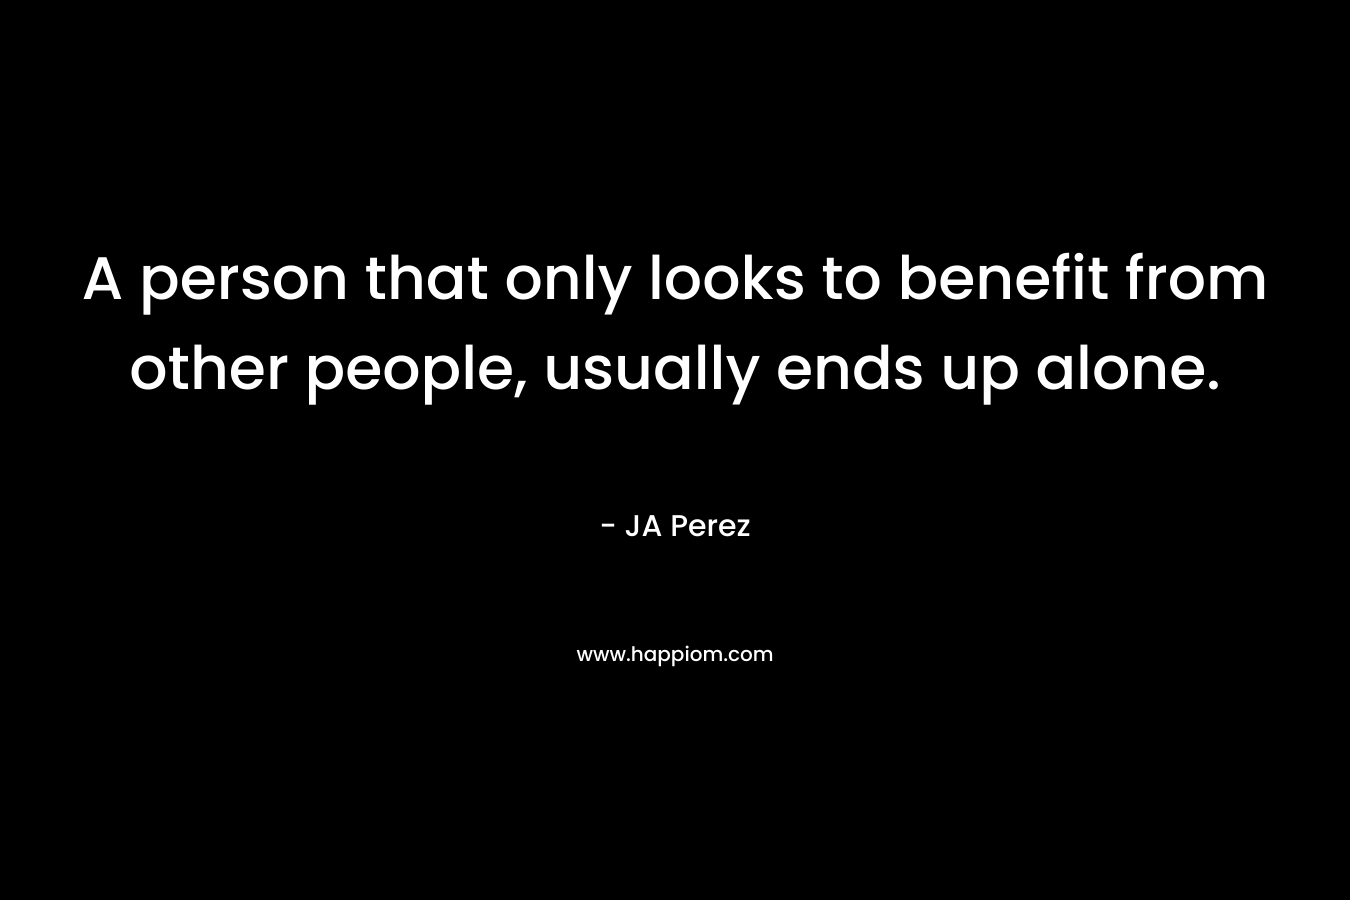 A person that only looks to benefit from other people, usually ends up alone. – JA Perez